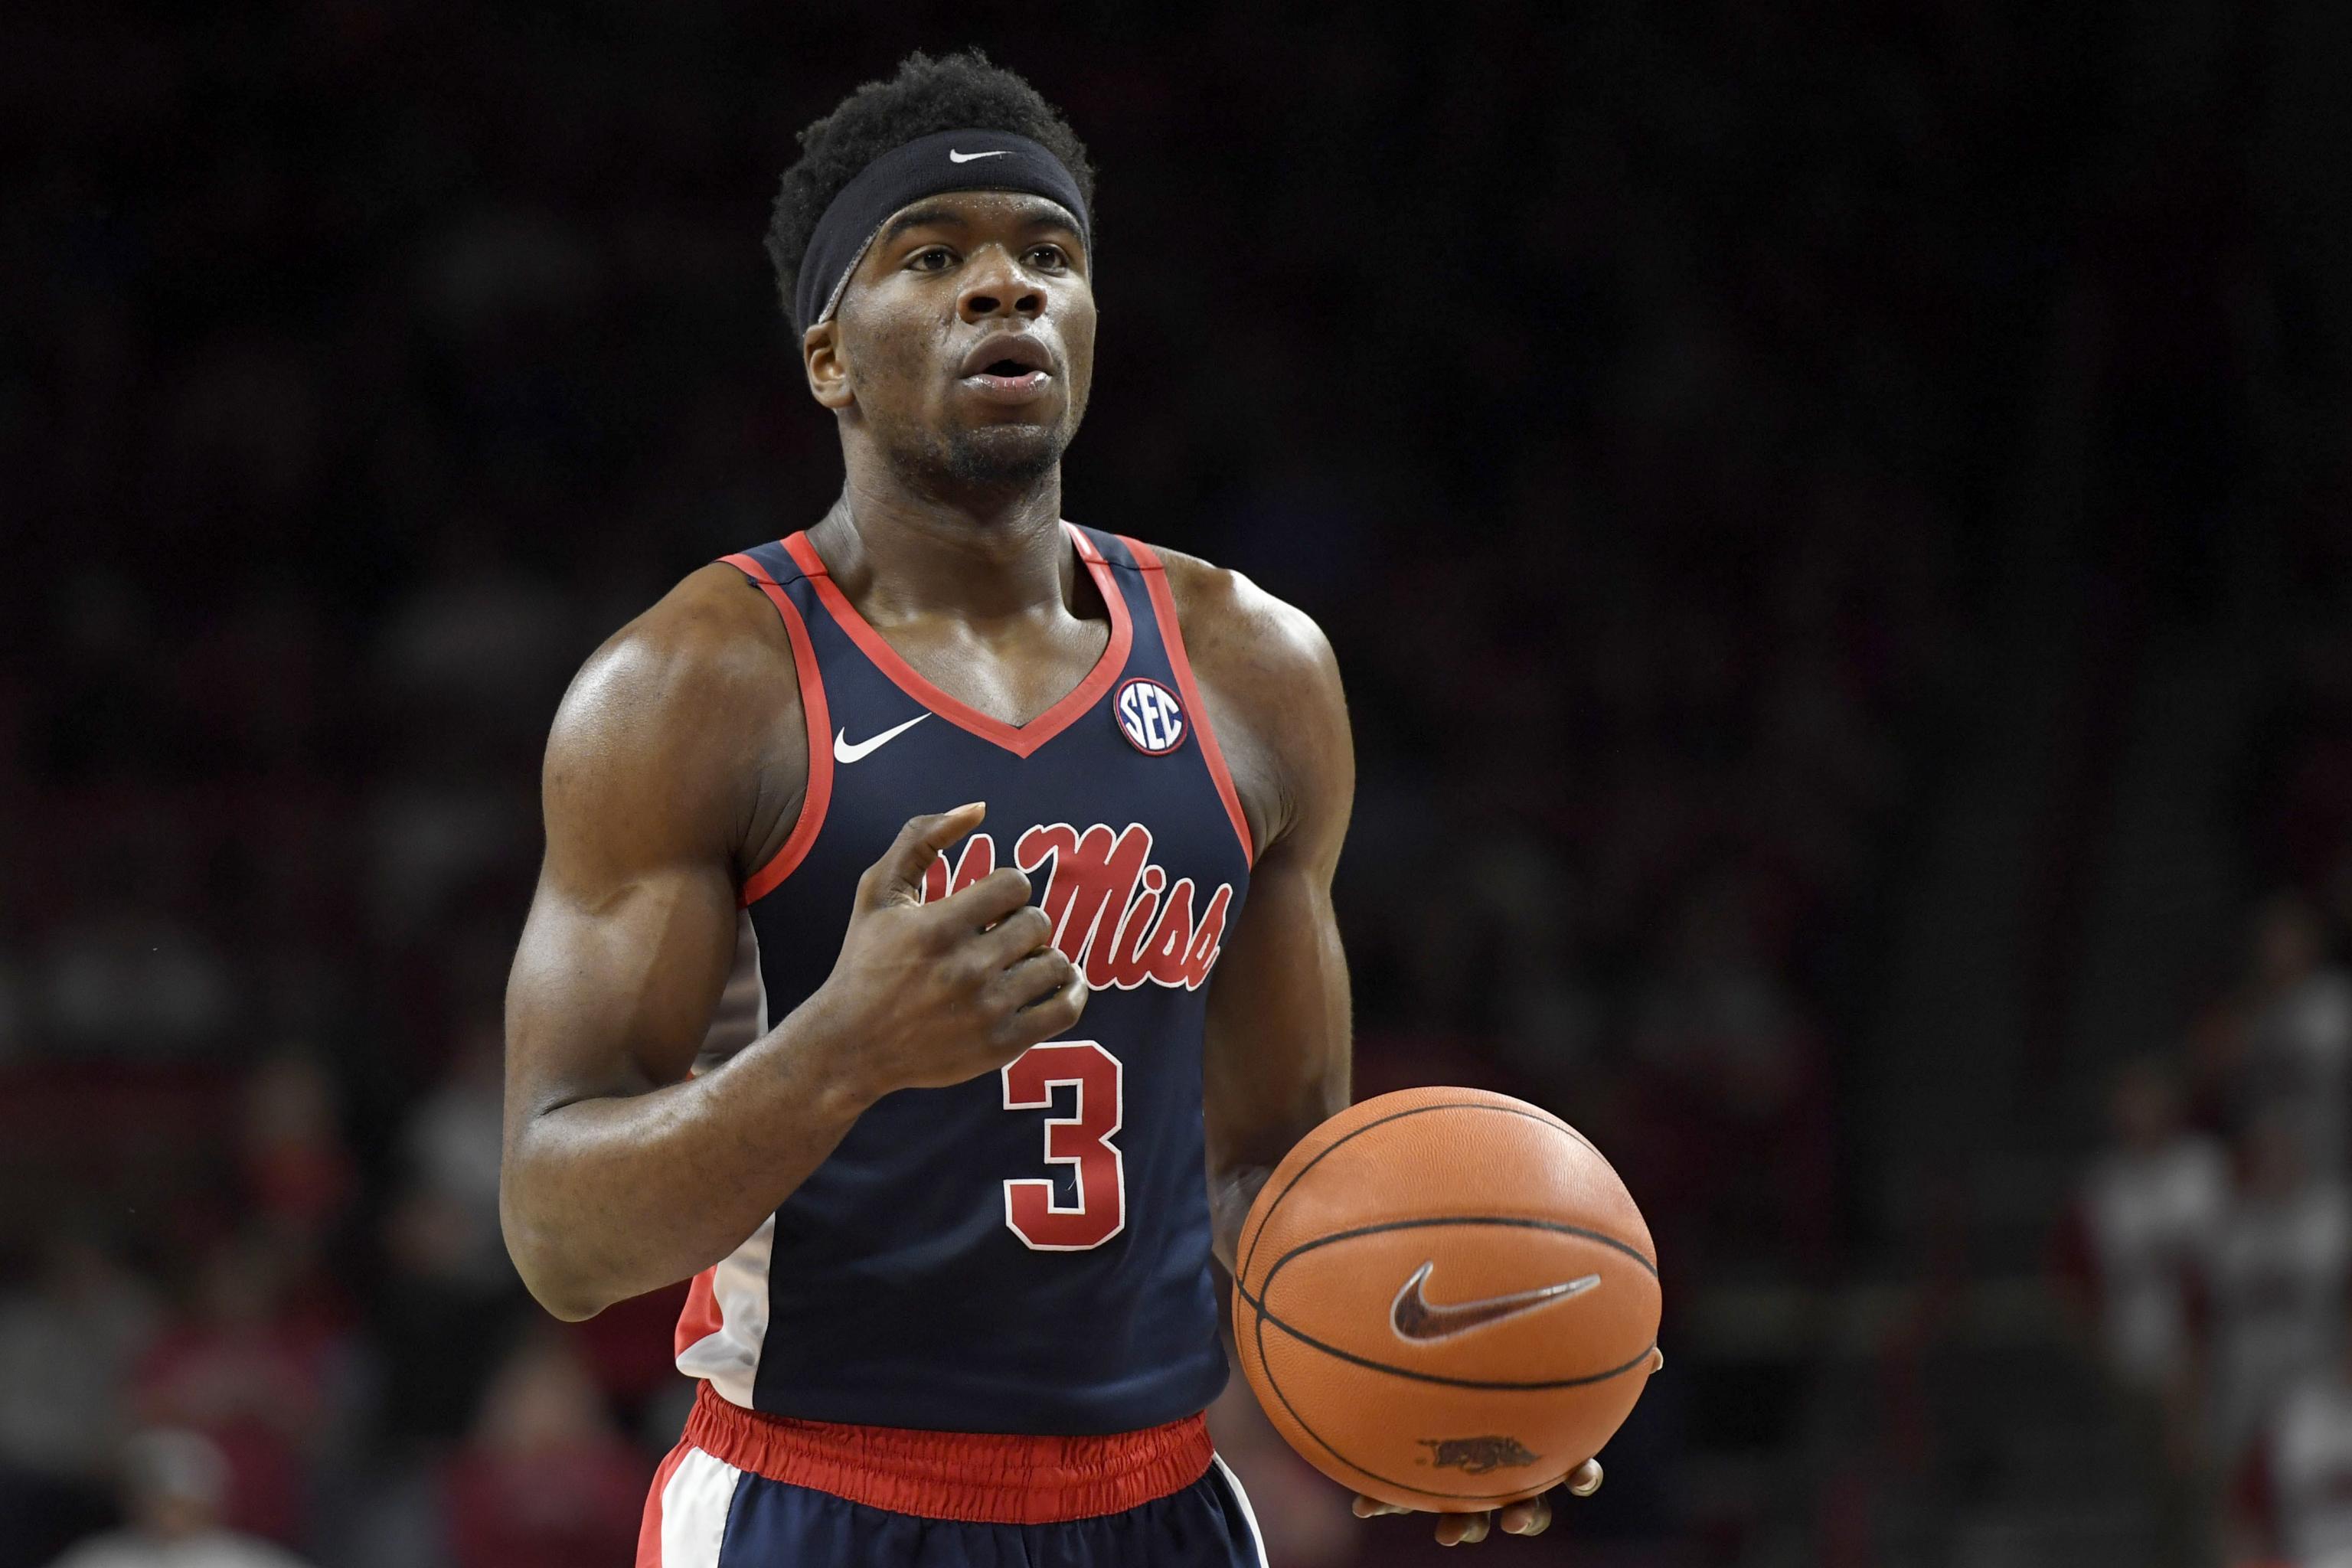 Ole Miss basketball's Terence Davis signs with Toronto Raptors